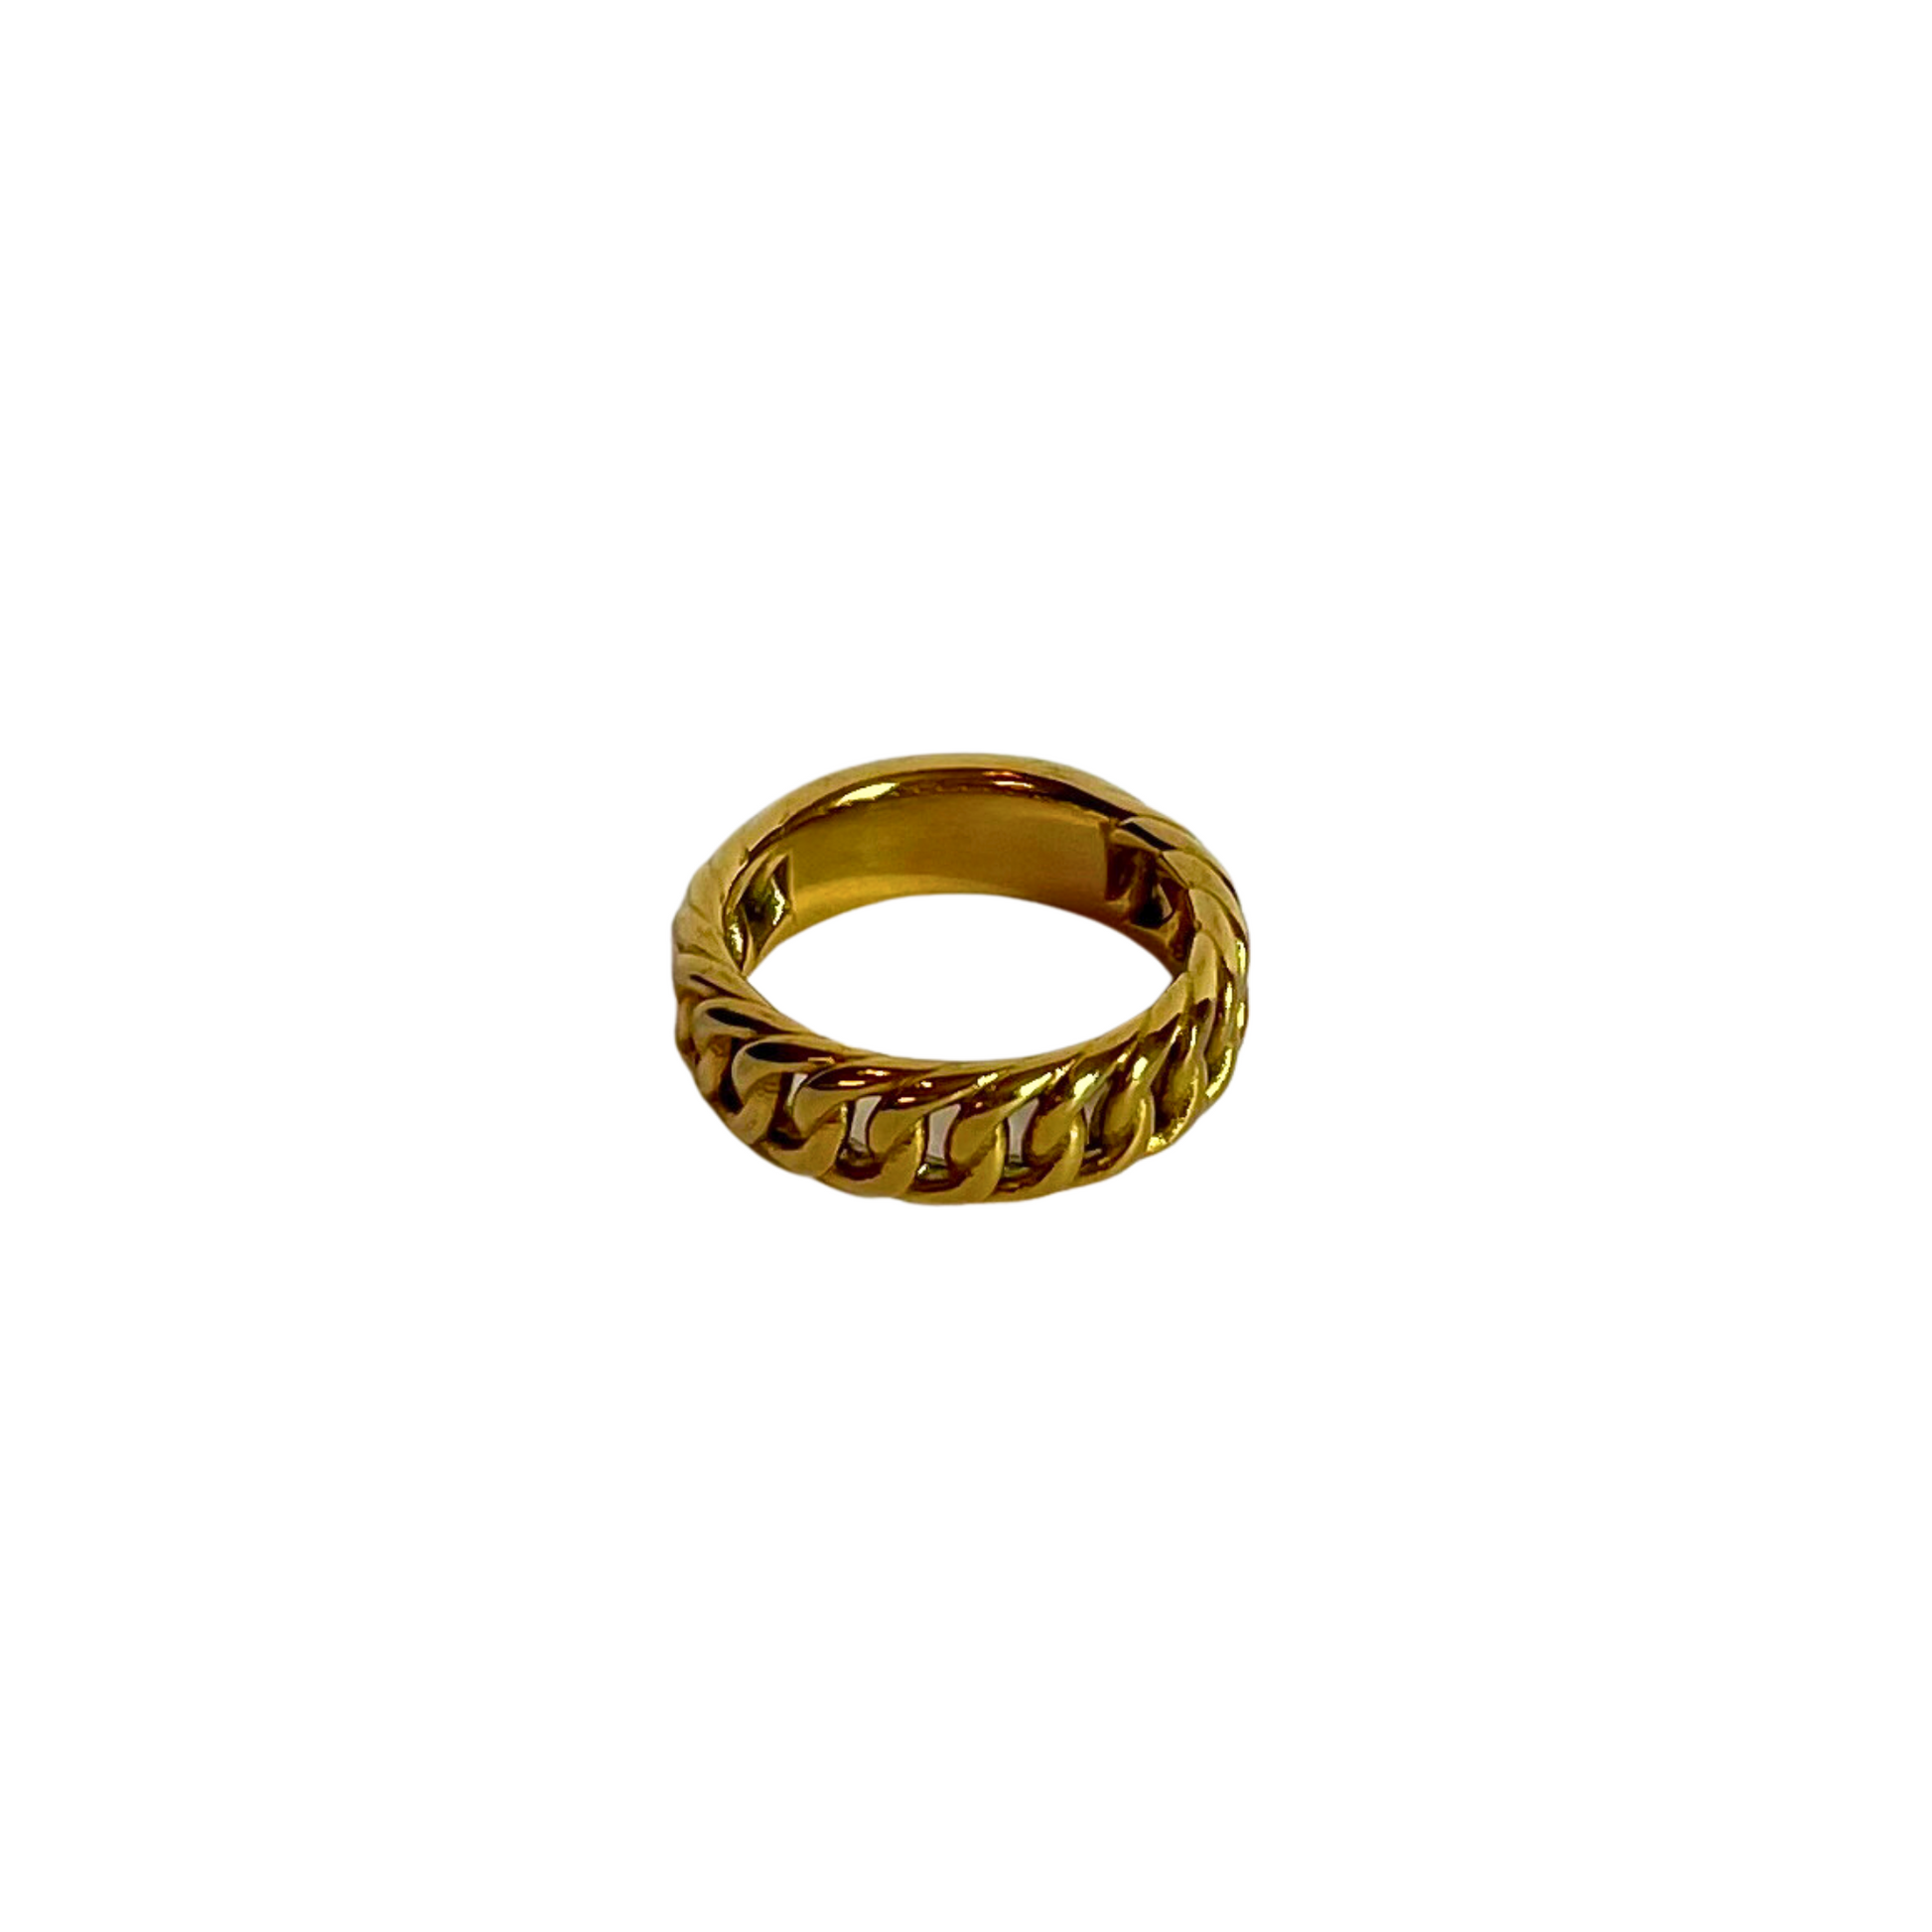 Chain ring from ShopEternidad.com Affordable 18K Gold Plated Jewelry